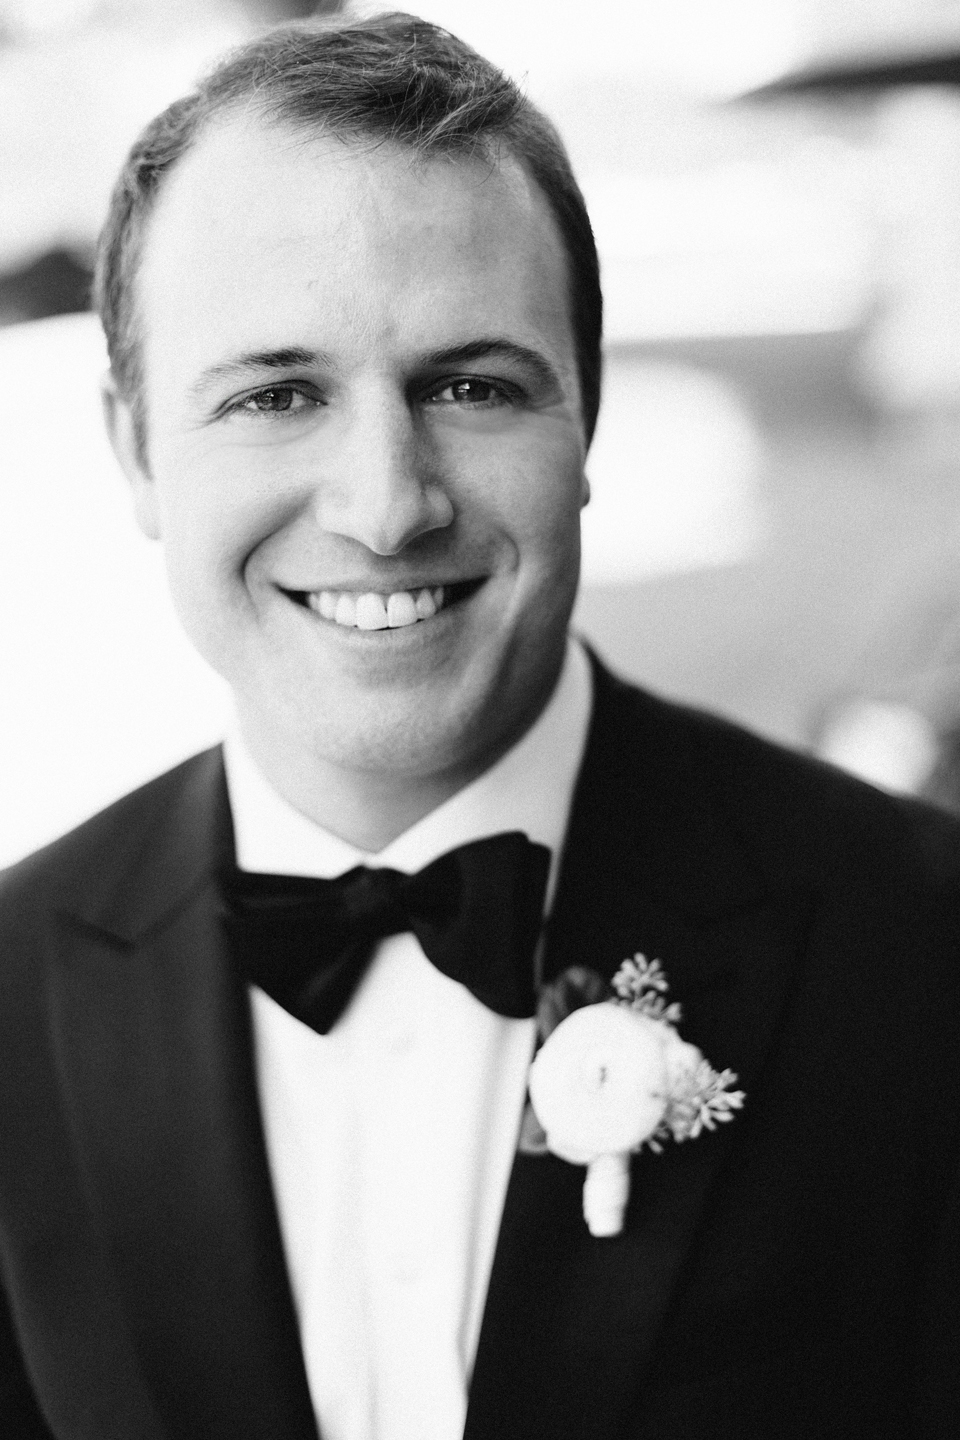 Image of a groom in a black tuxedo on this wedding day.  The groom is at the TPC Sawgrass in Ponte Vedra, Florida